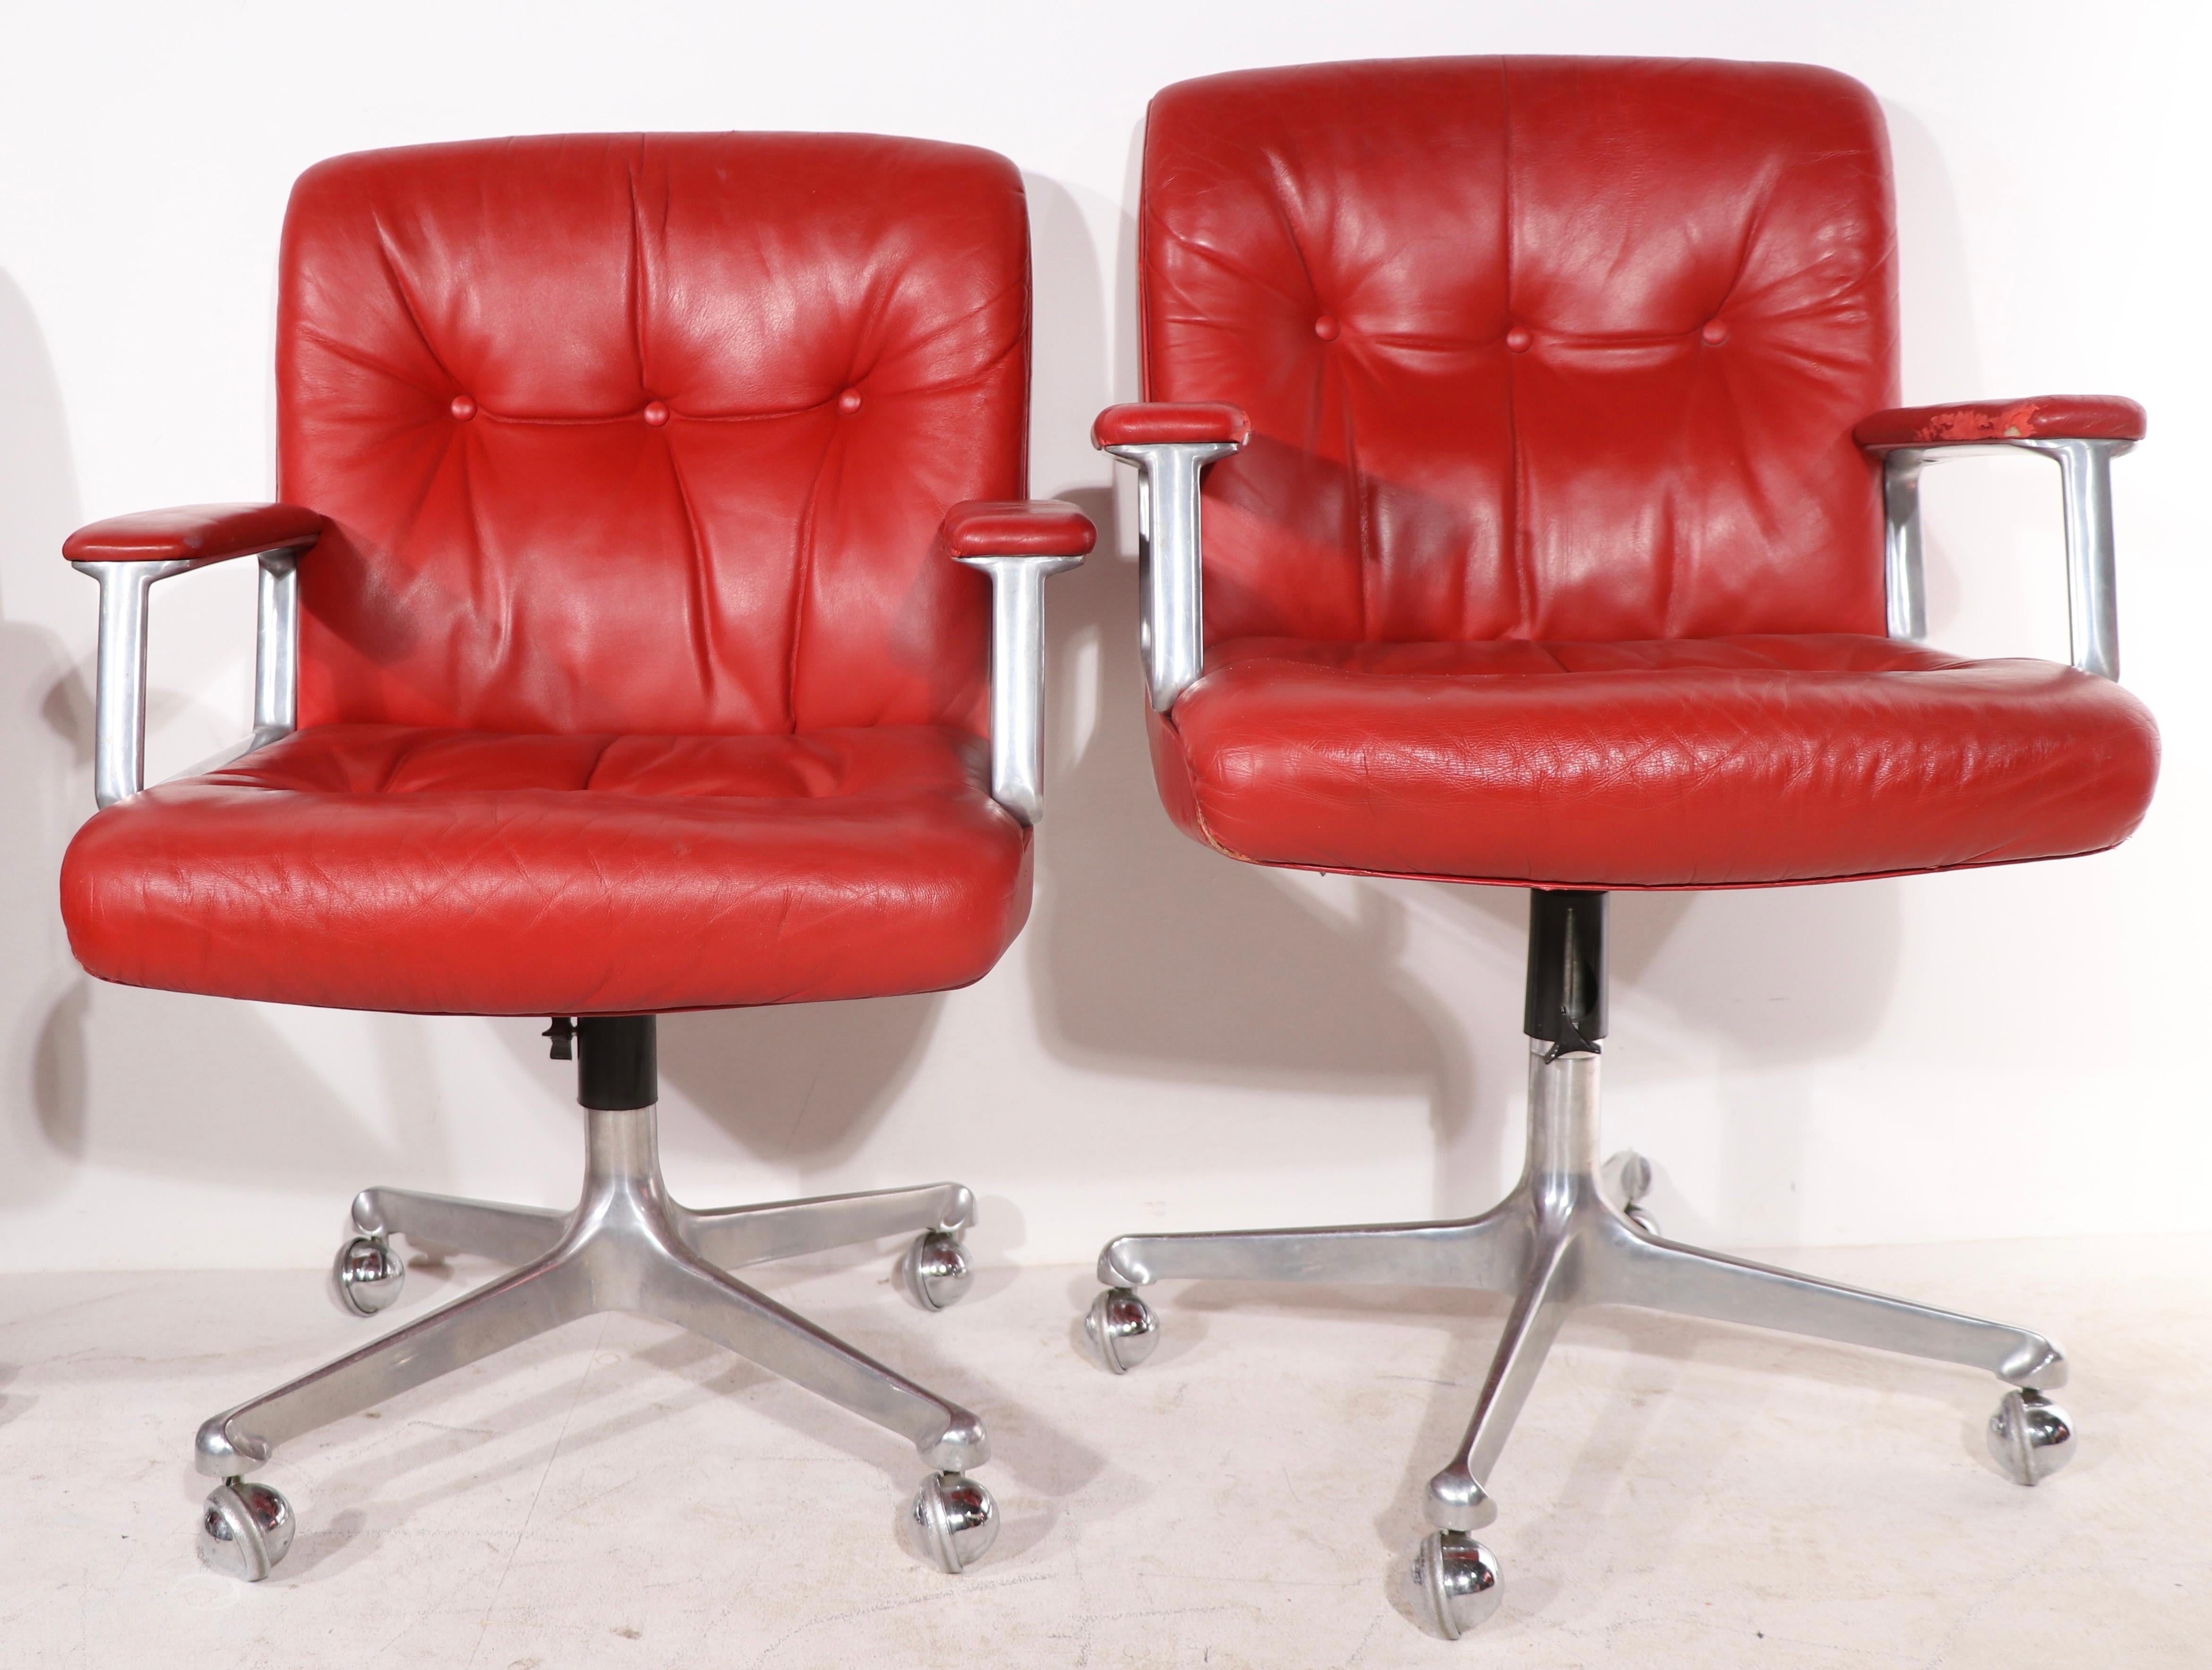 8 P128 Borsani Swivel Desk Chairs in Lipstick Red Leather Upholstery  5